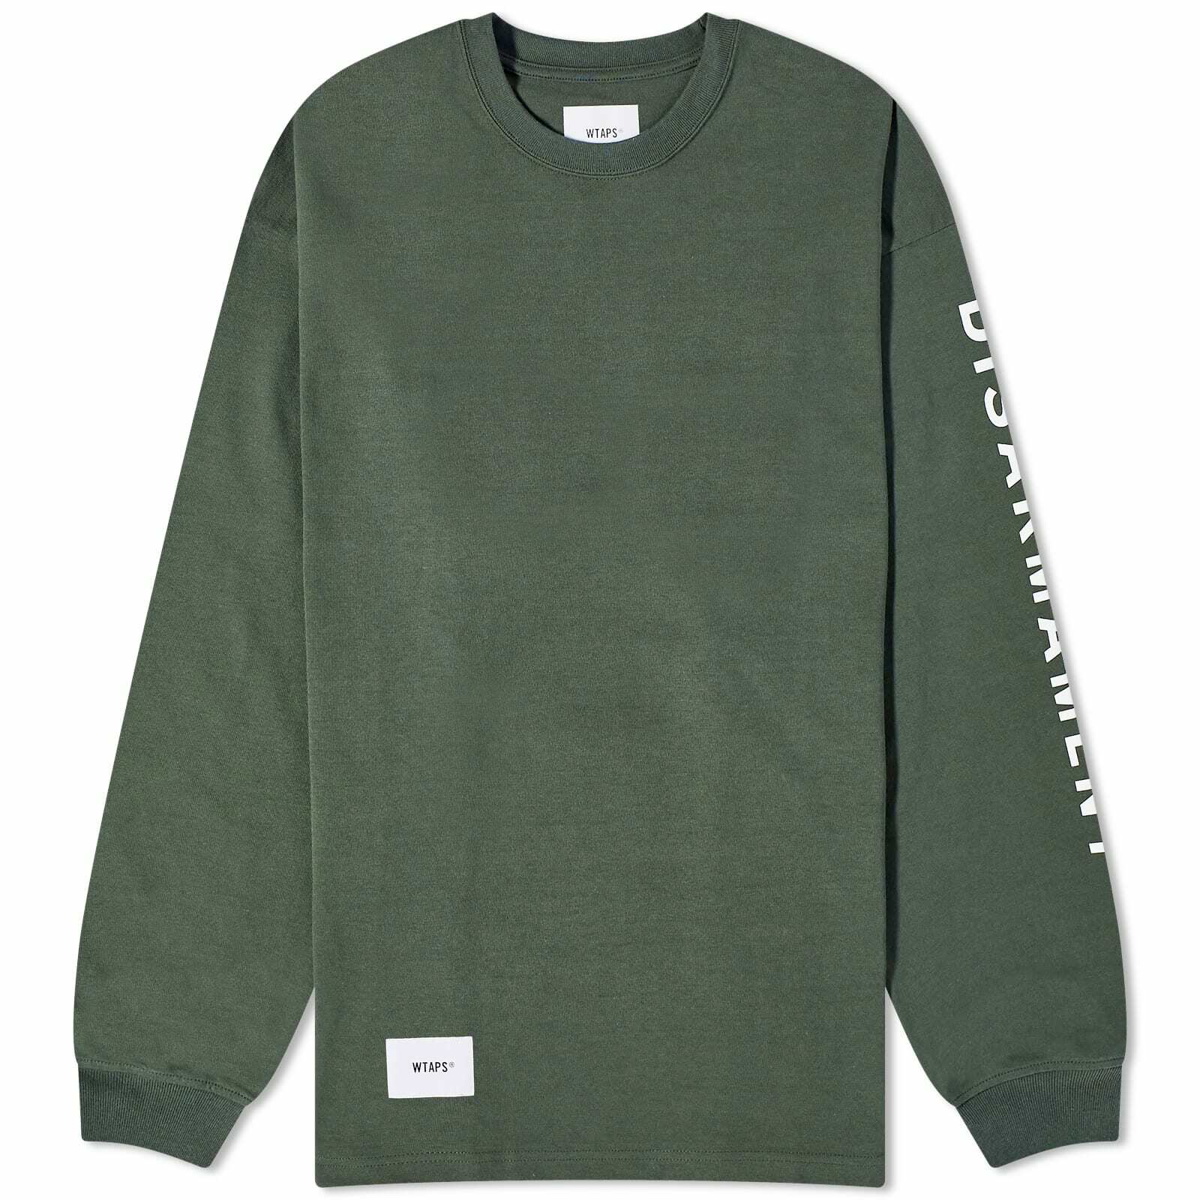 Photo: WTAPS Men's Long Sleeve 11 Disarmament T-Shirt in Olive Drab